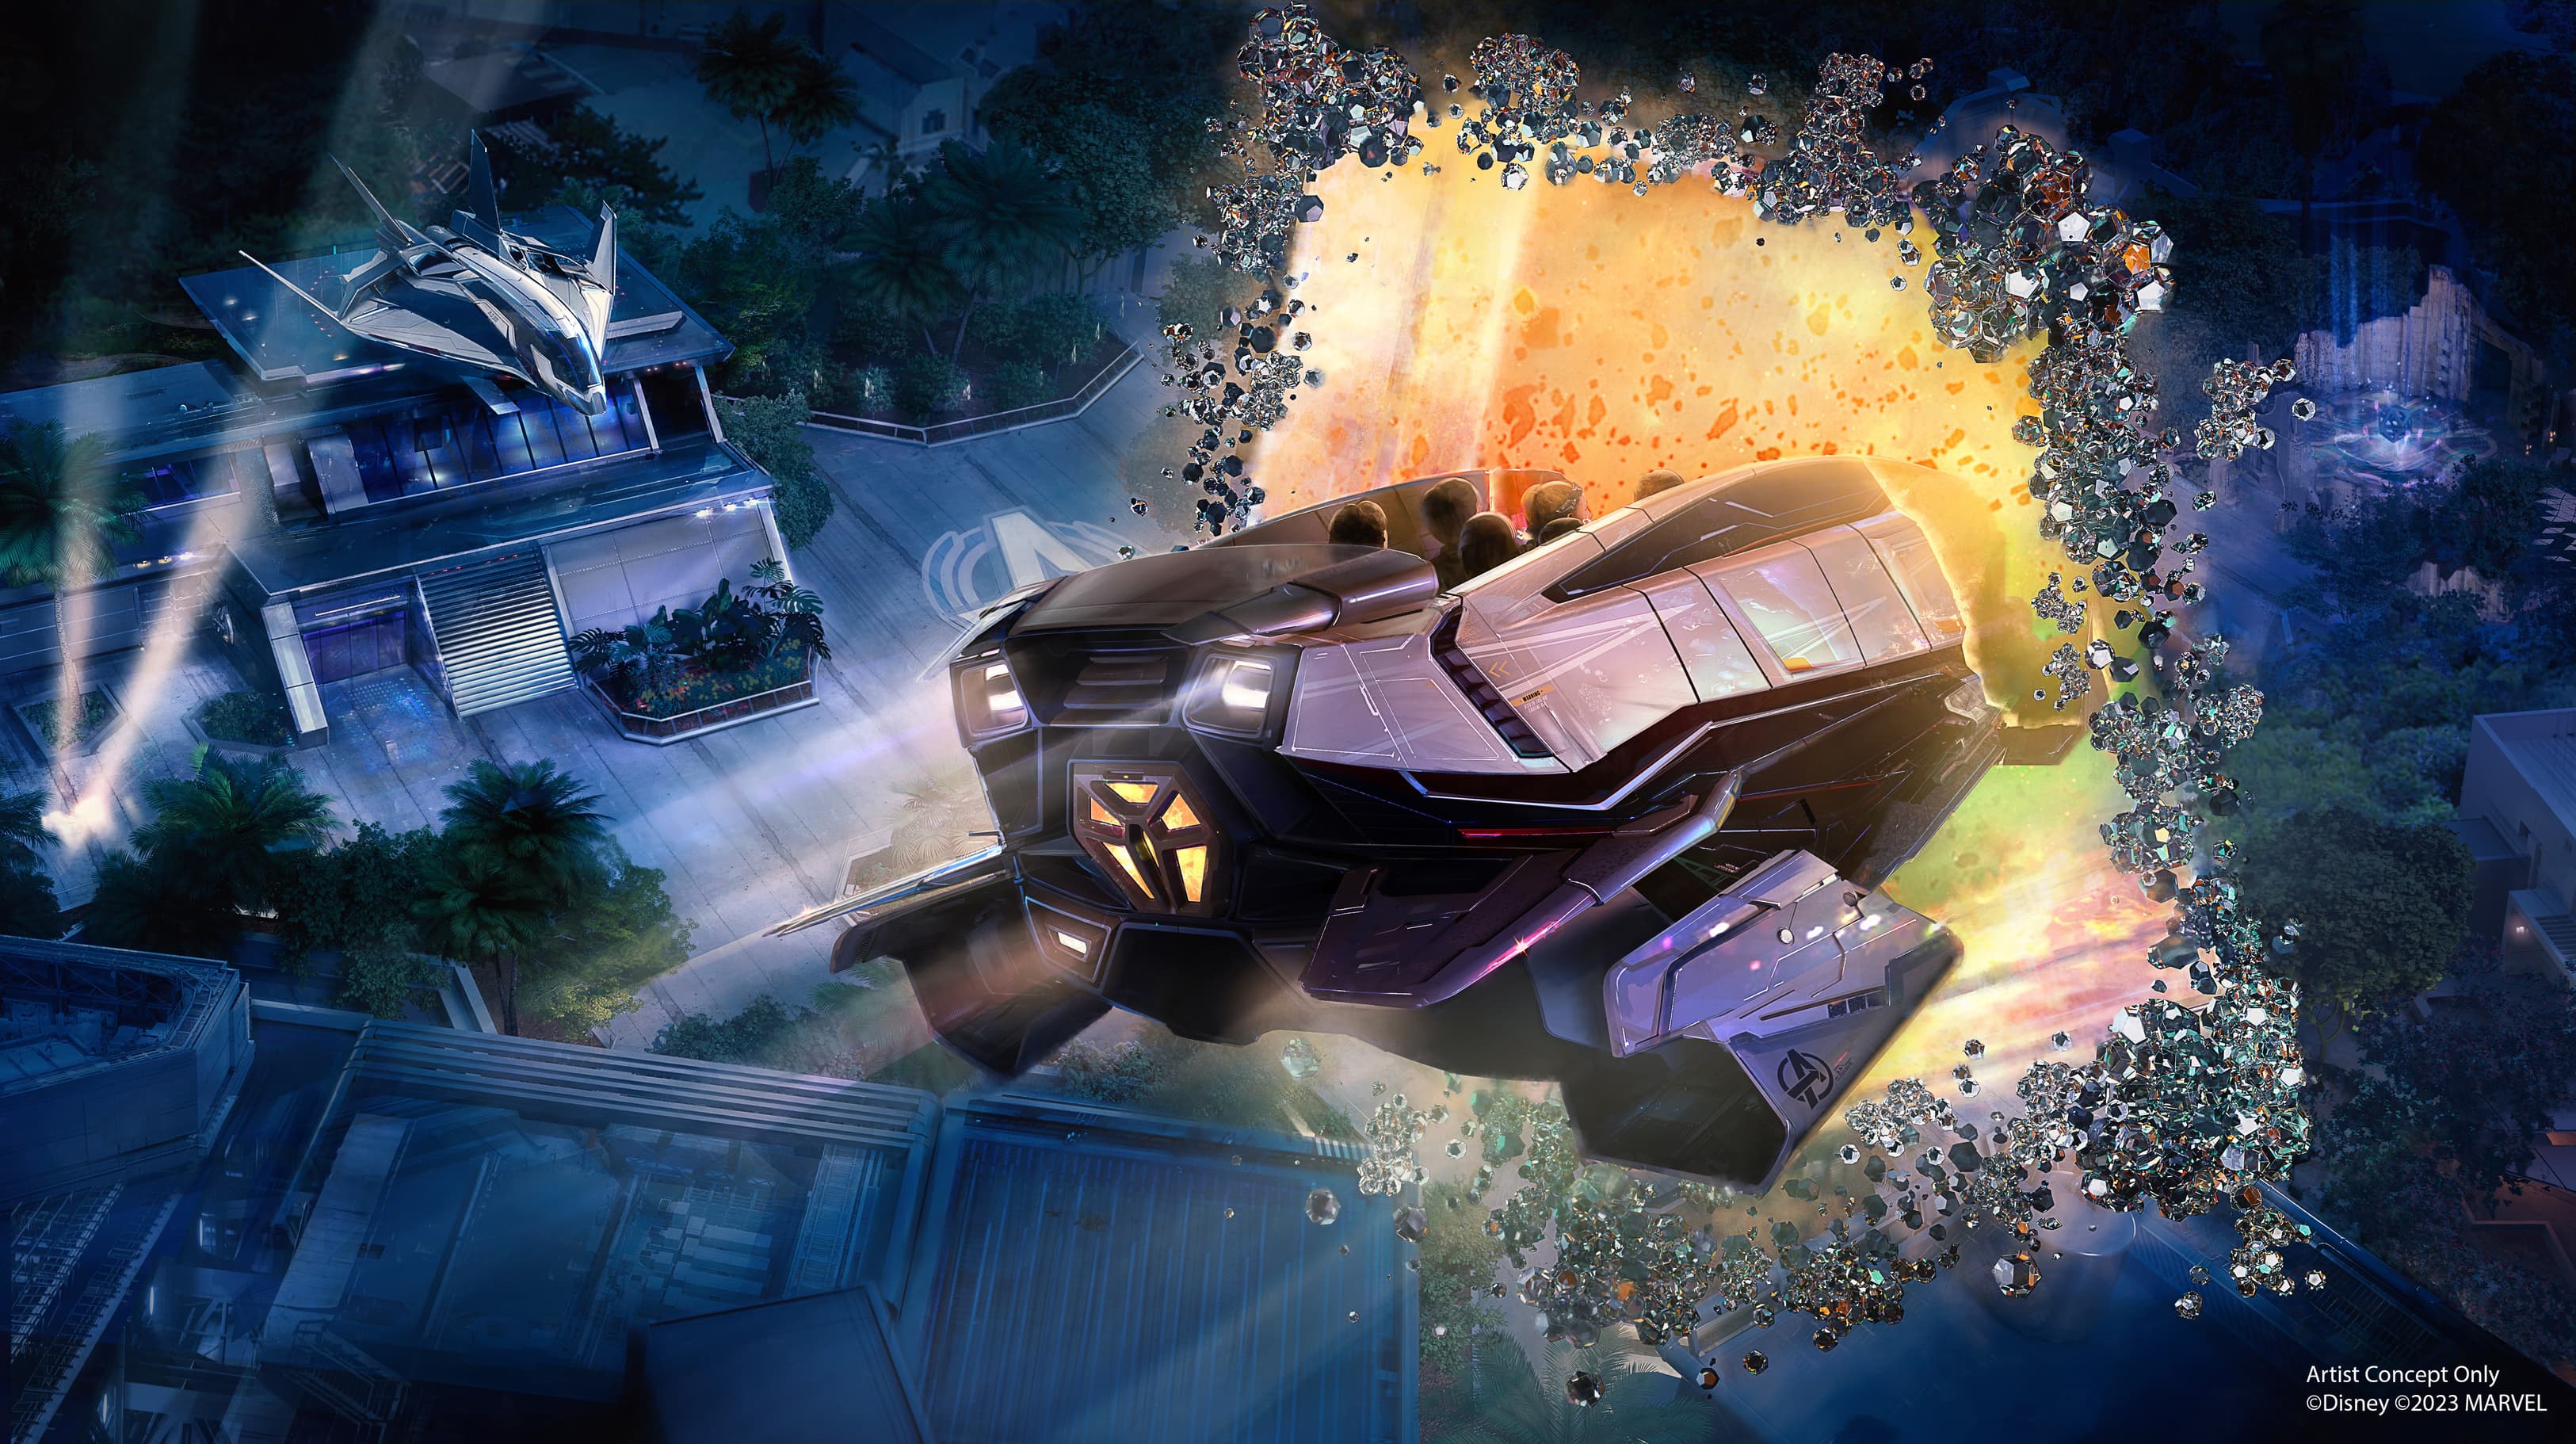 New Ride Vehicle Revealed for Upcoming Avengers Campus Attraction | Marvel